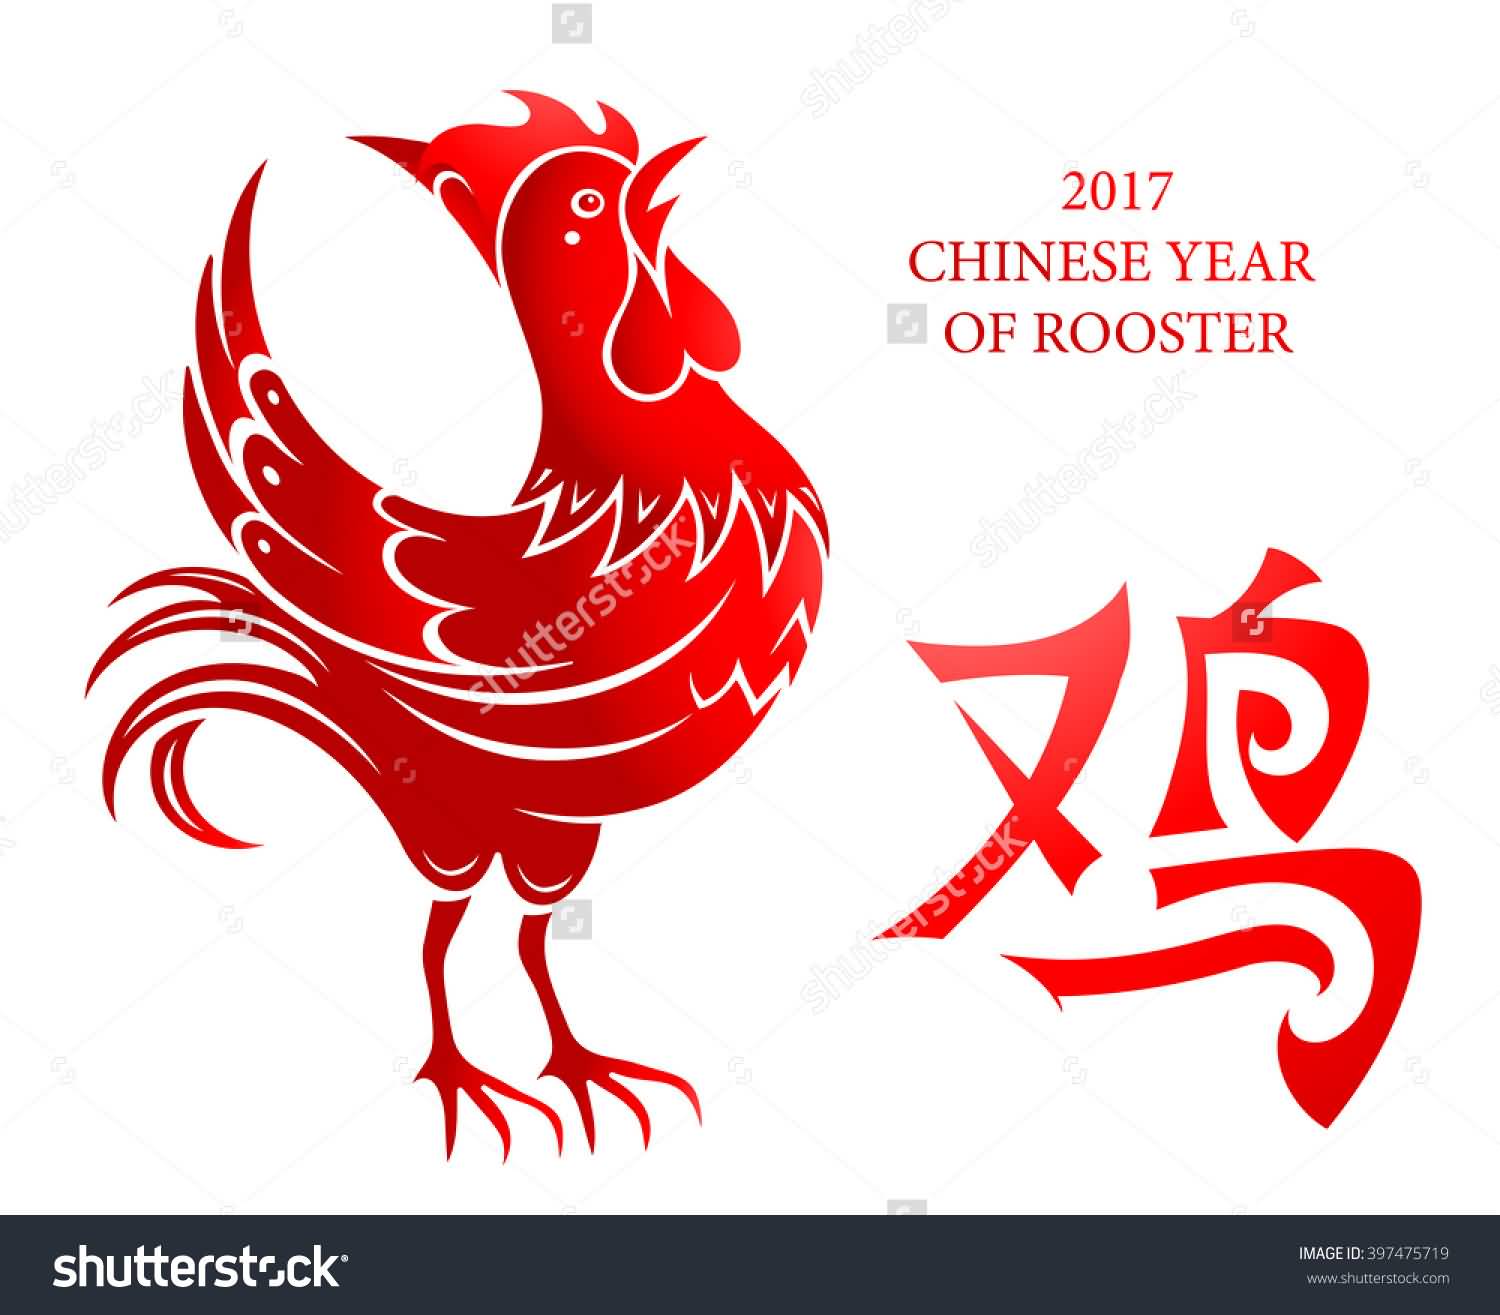 2017 Chinese Year Of Rooster Wishes Picture